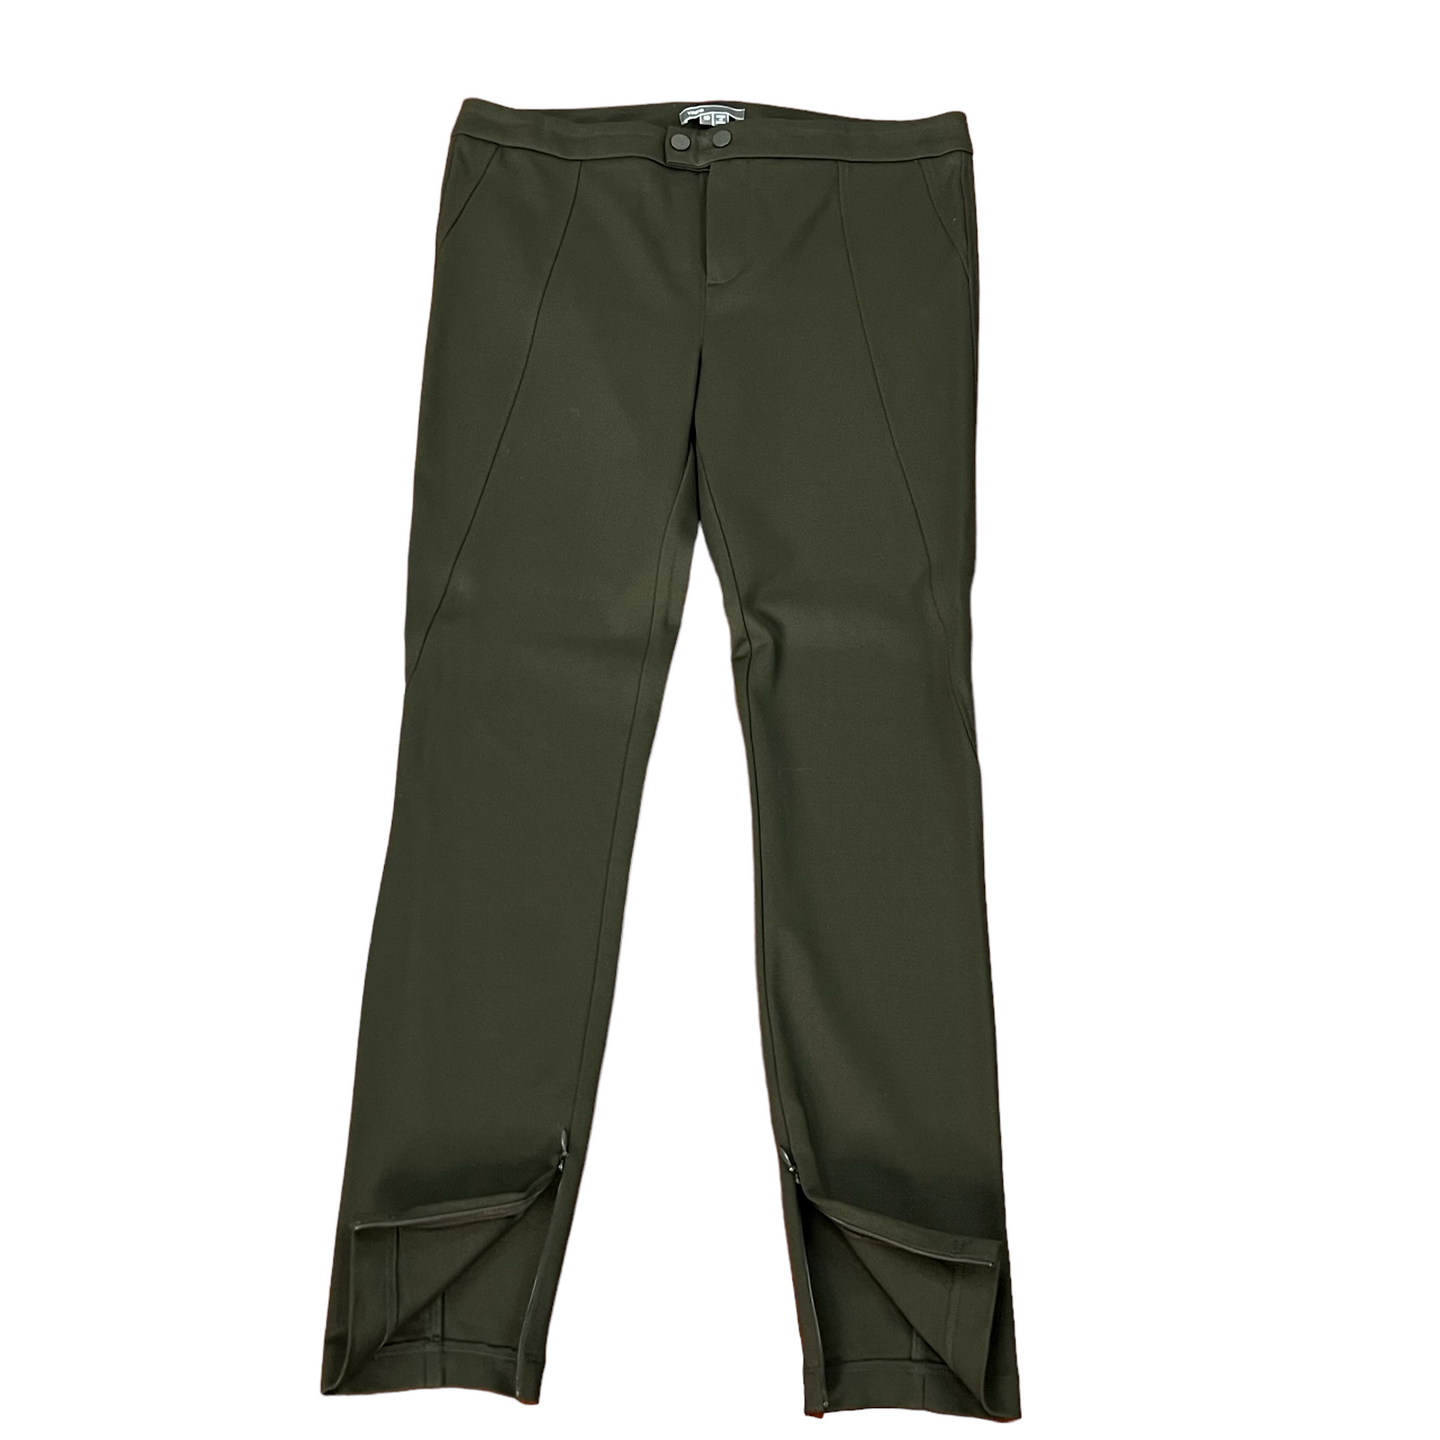 Vince Olive Ponte Pant with Ankle Zippers Tapered Leg Size 10